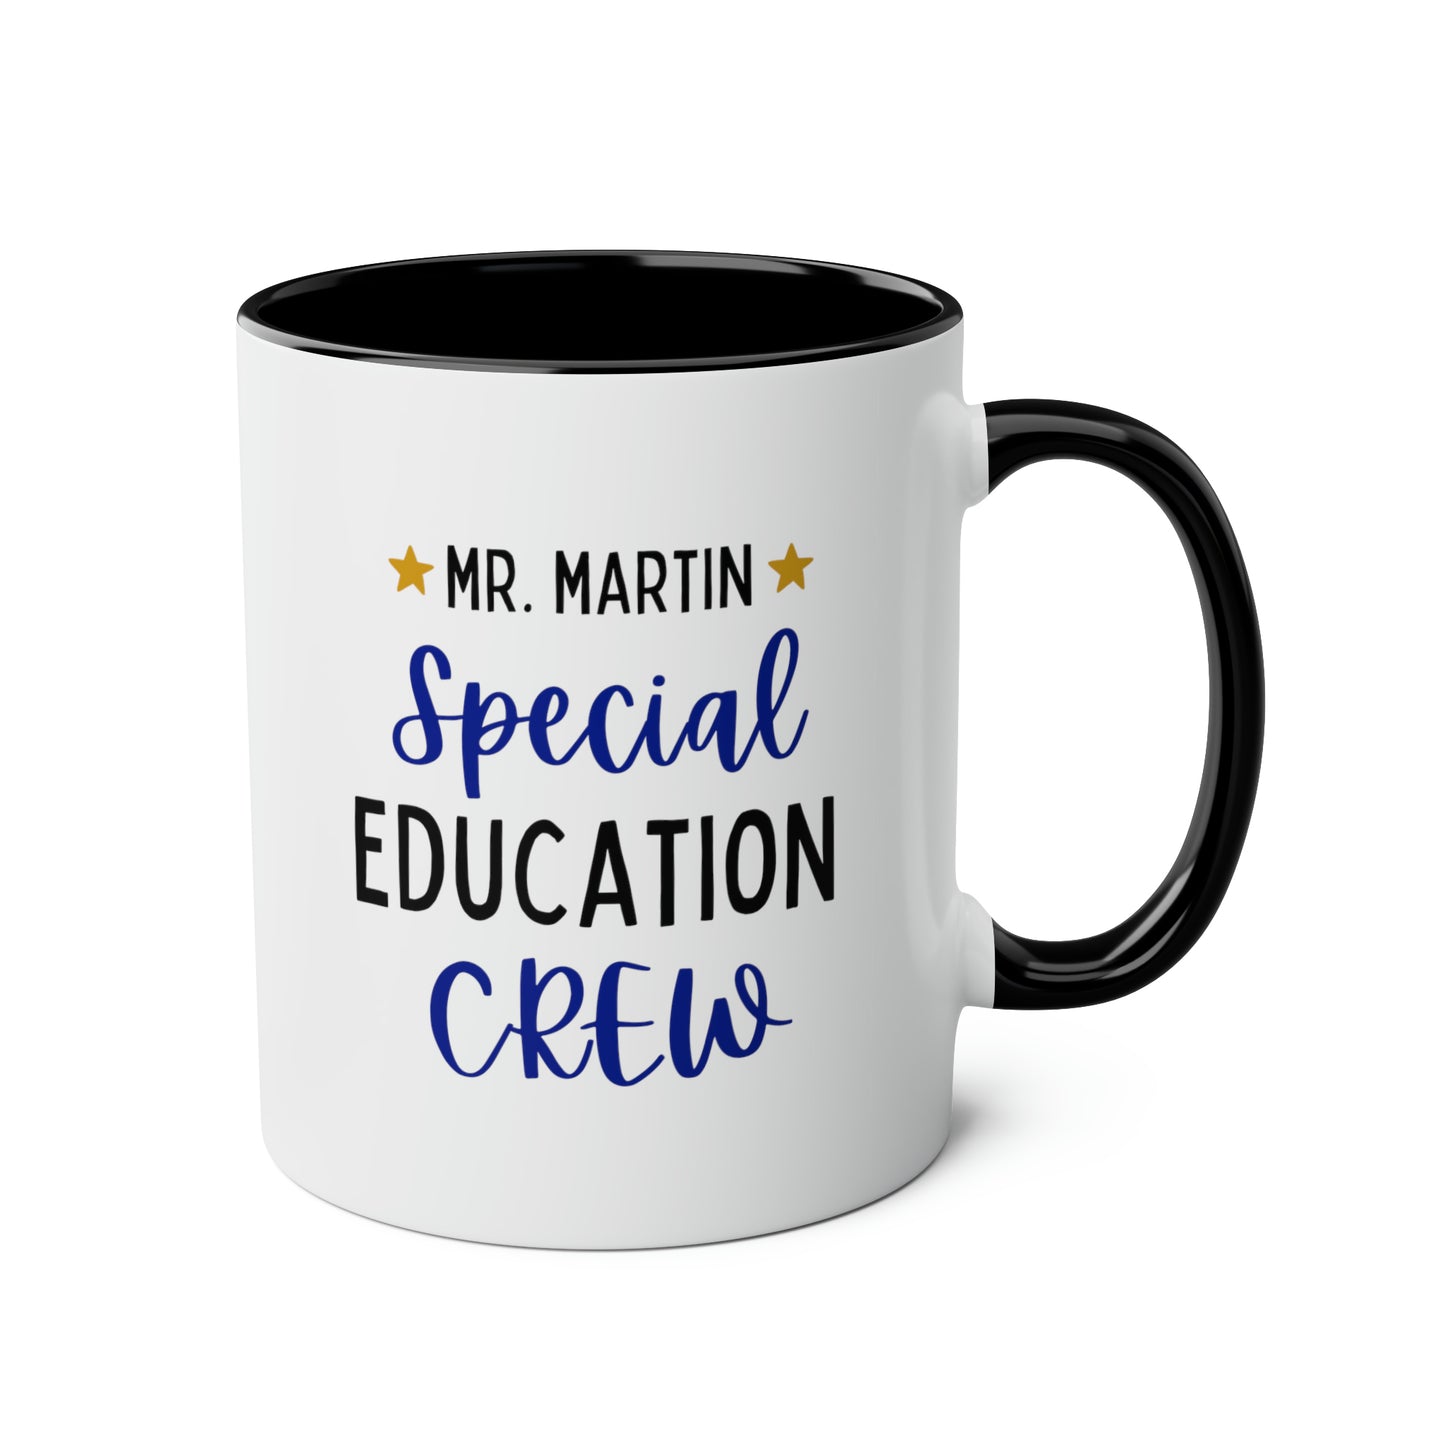 Special Education Crew 11oz white with black accent funny large coffee mug gift for  teacher SPED custom personalized customize name  waveywares wavey wares wavywares wavy wares